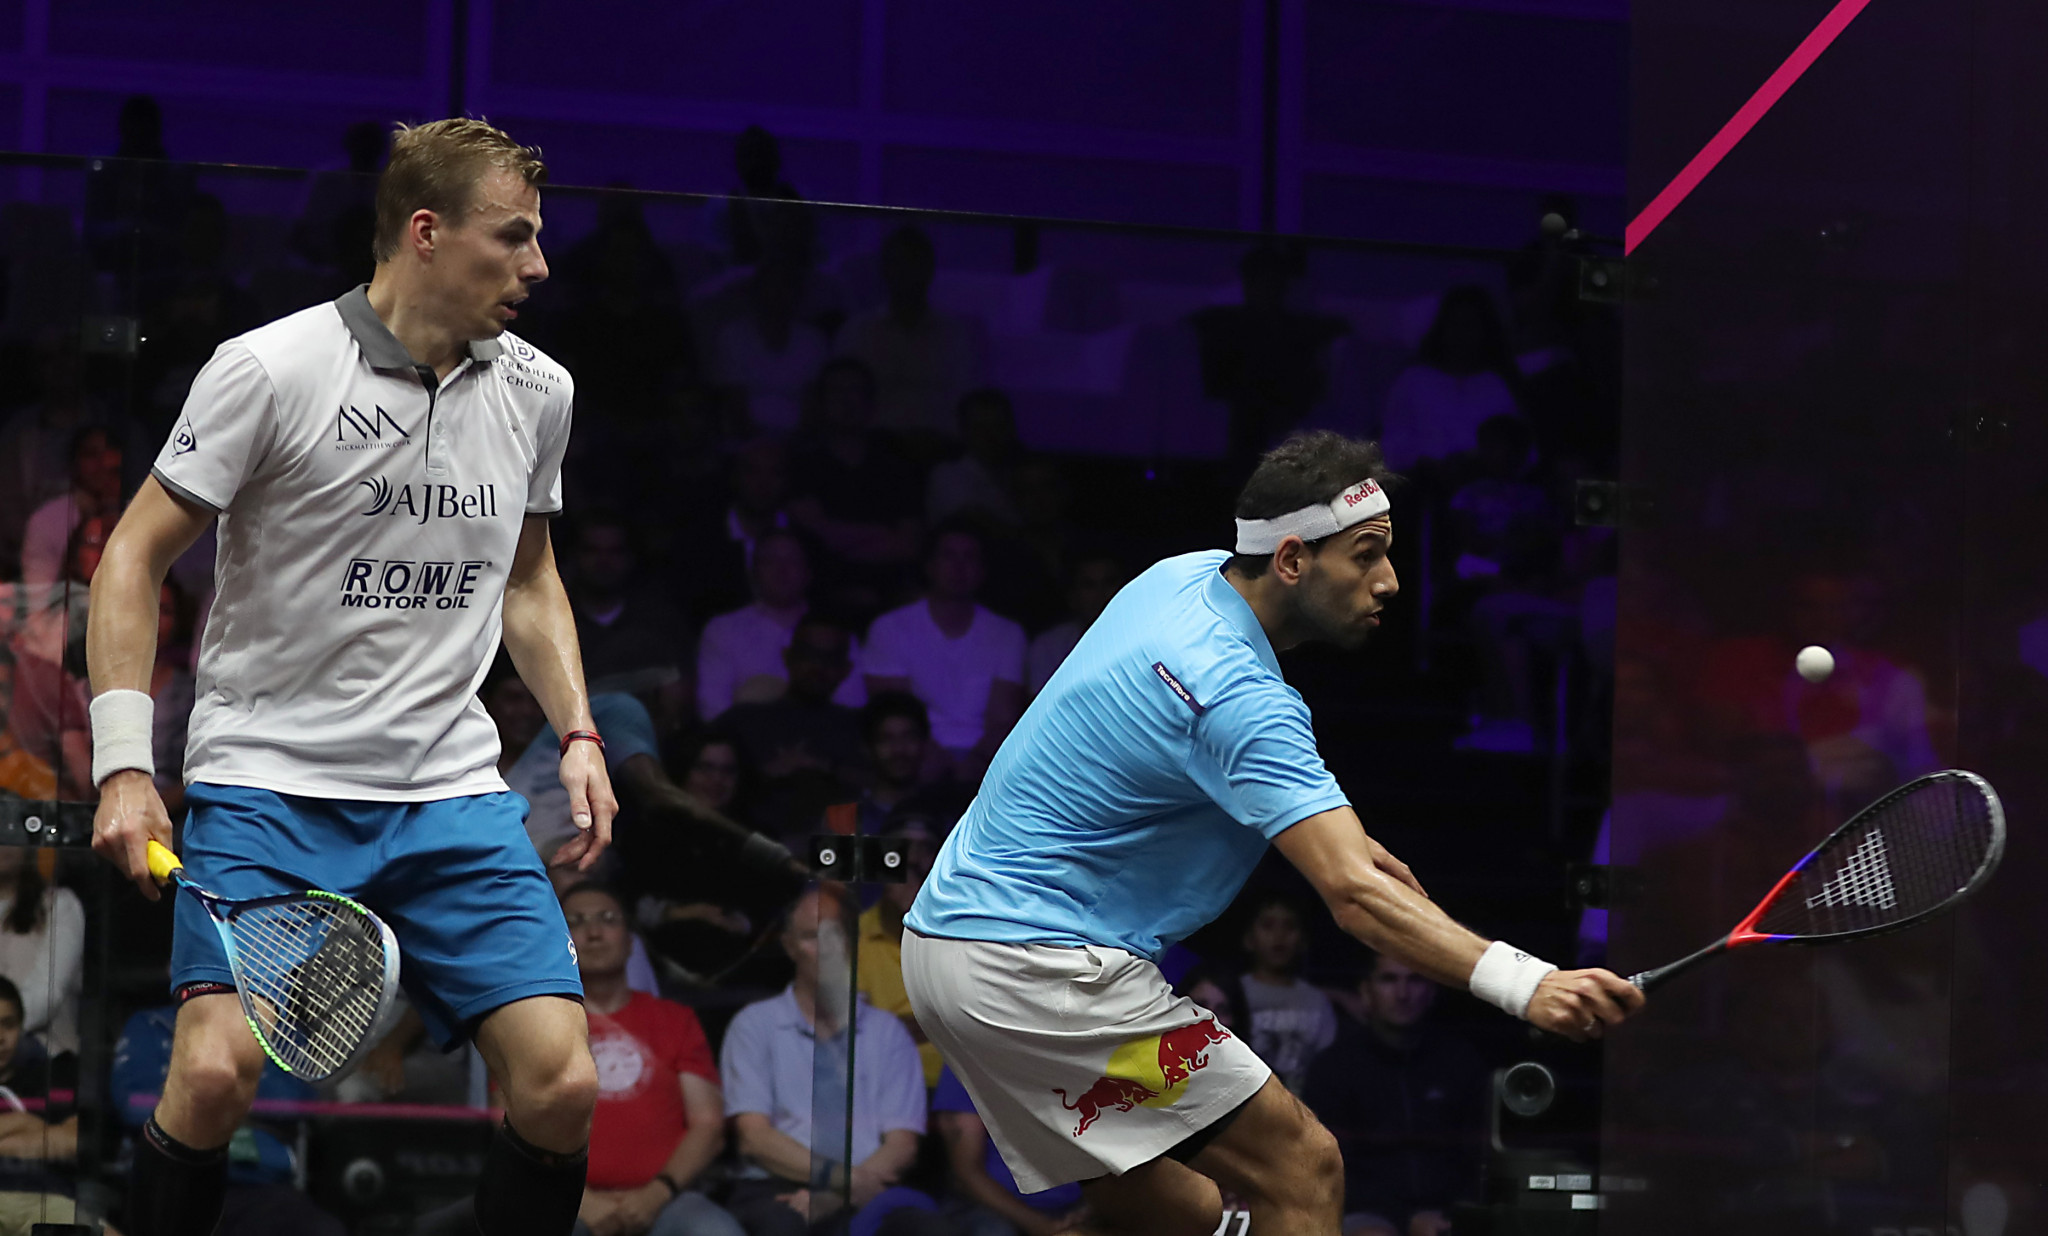 Matthew's 20-year squash career ends with defeat at PSA World Series in Dubai - and a standing ovation